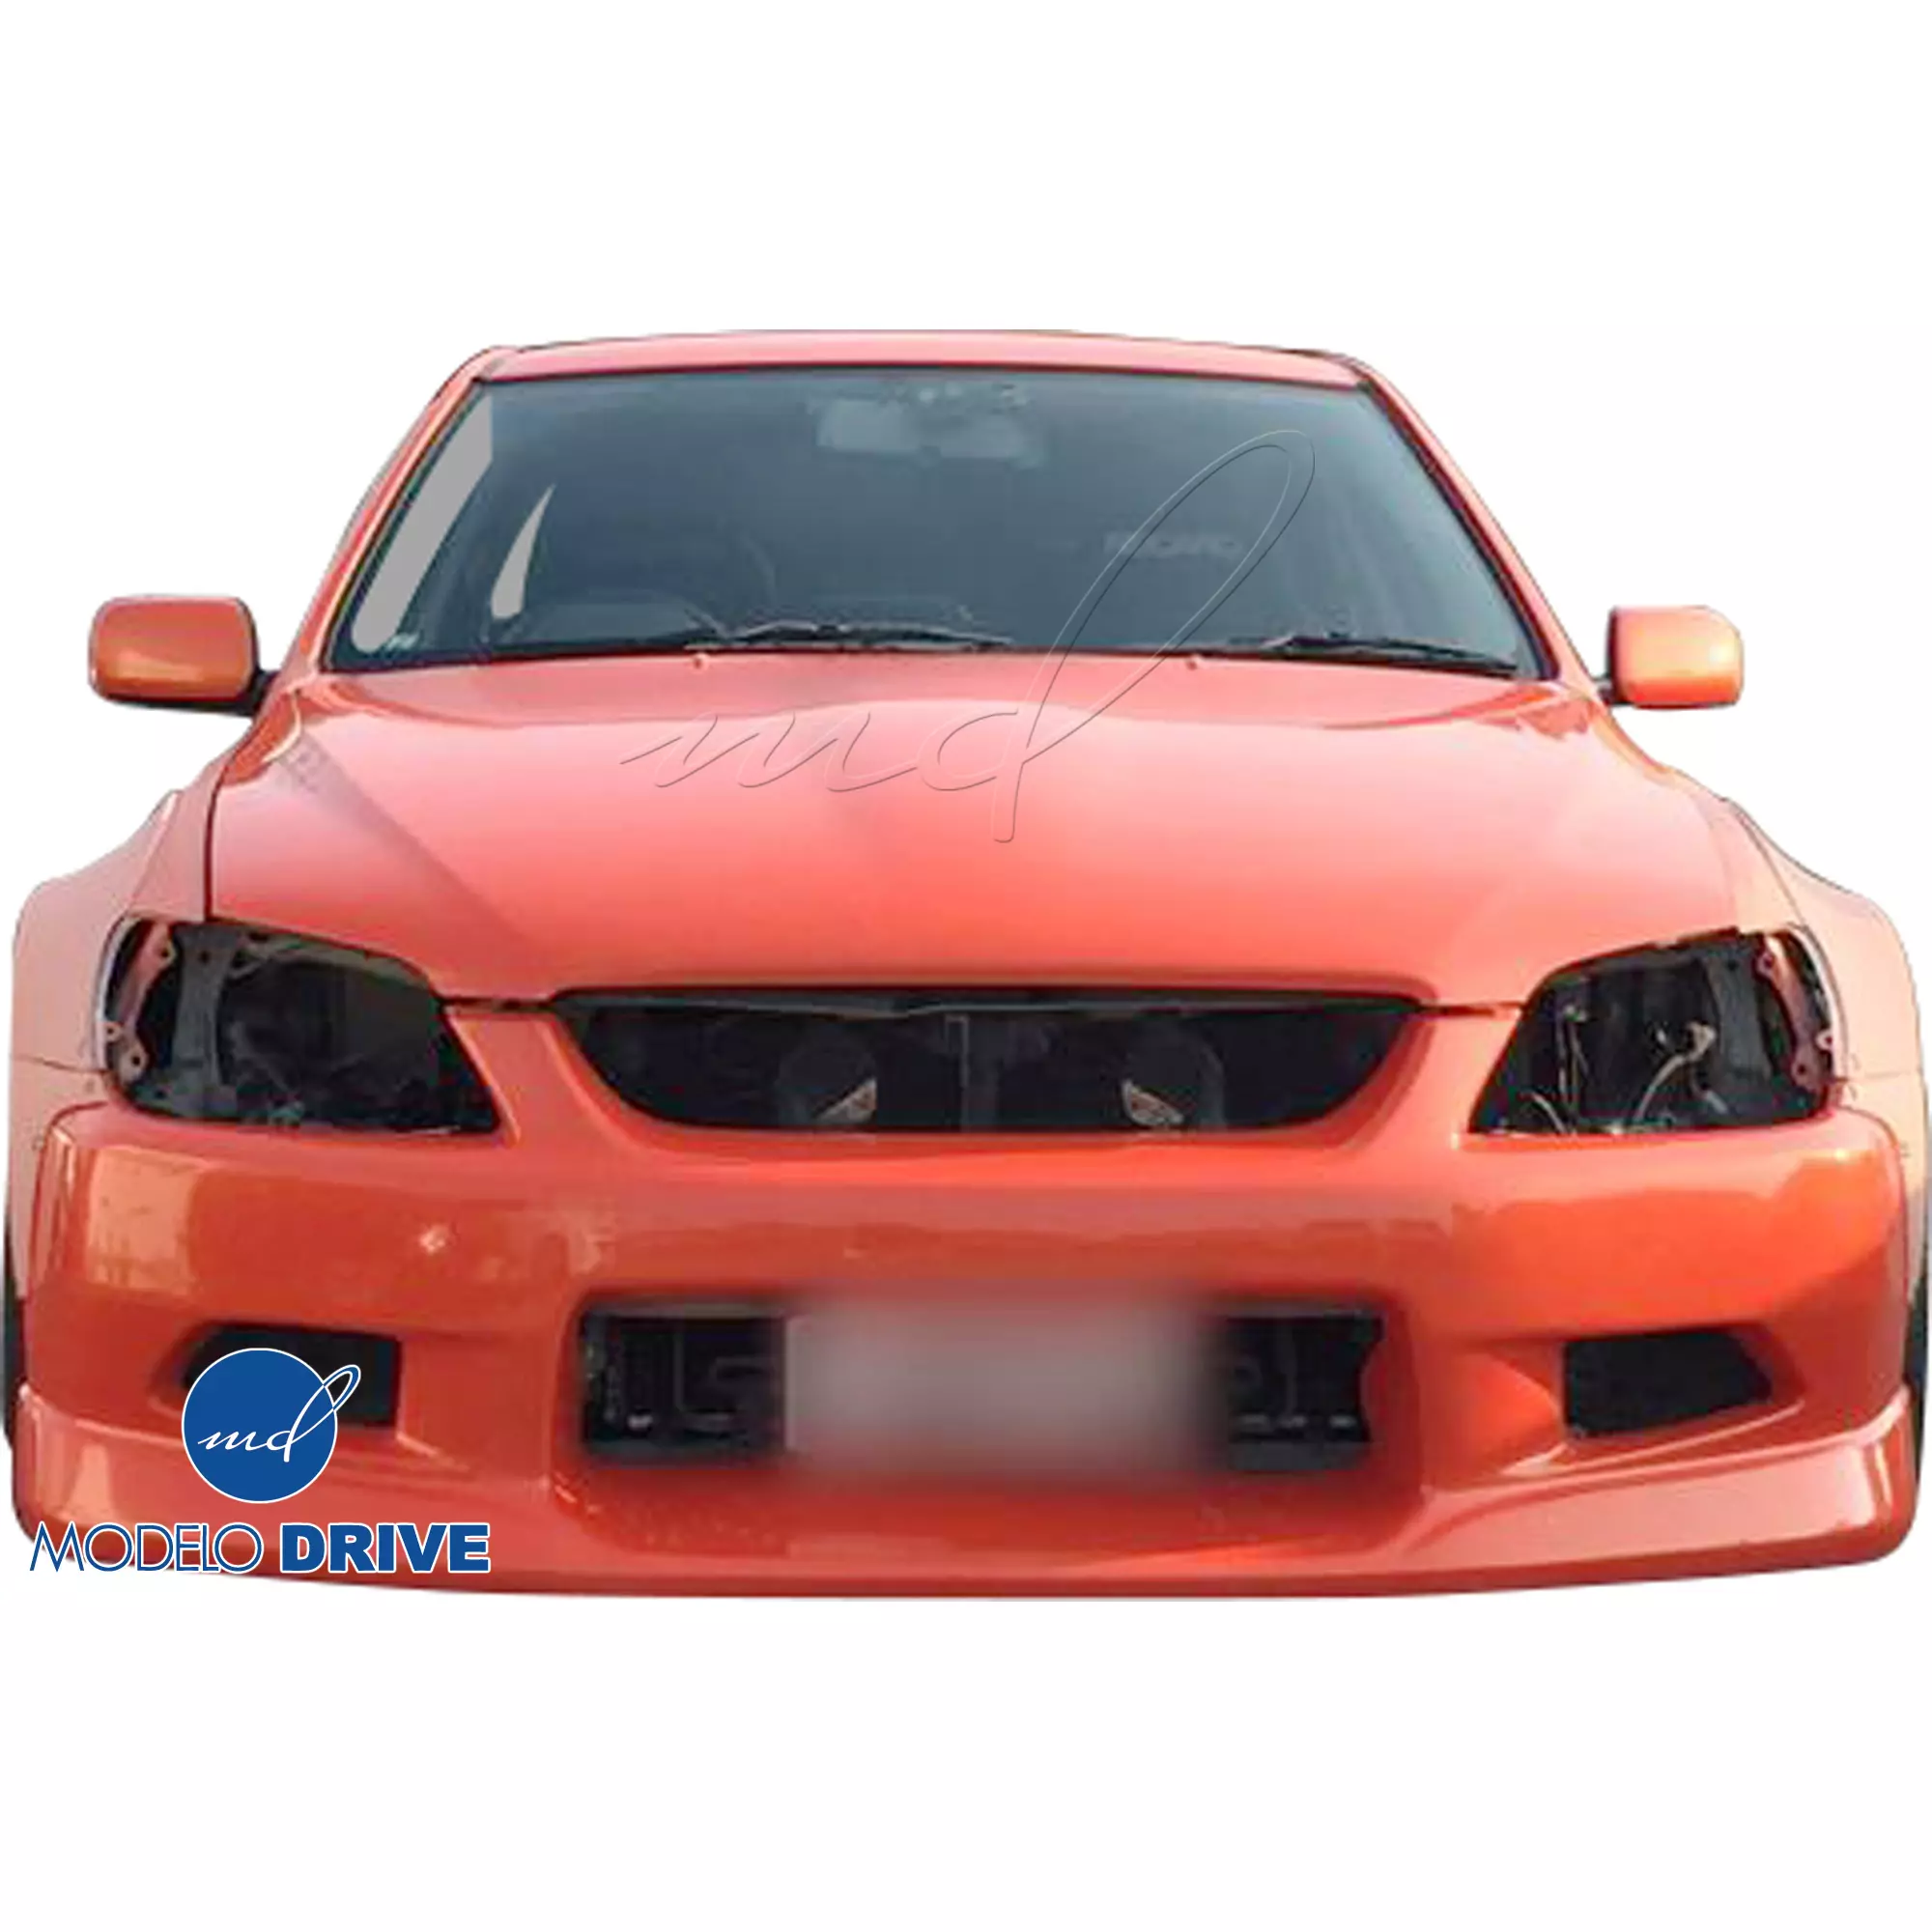 ModeloDrive FRP MSV Wide Body 30/65 Fender Flare Set 8pc > Lexus IS Series IS300 2000-2005> 4dr - Image 35